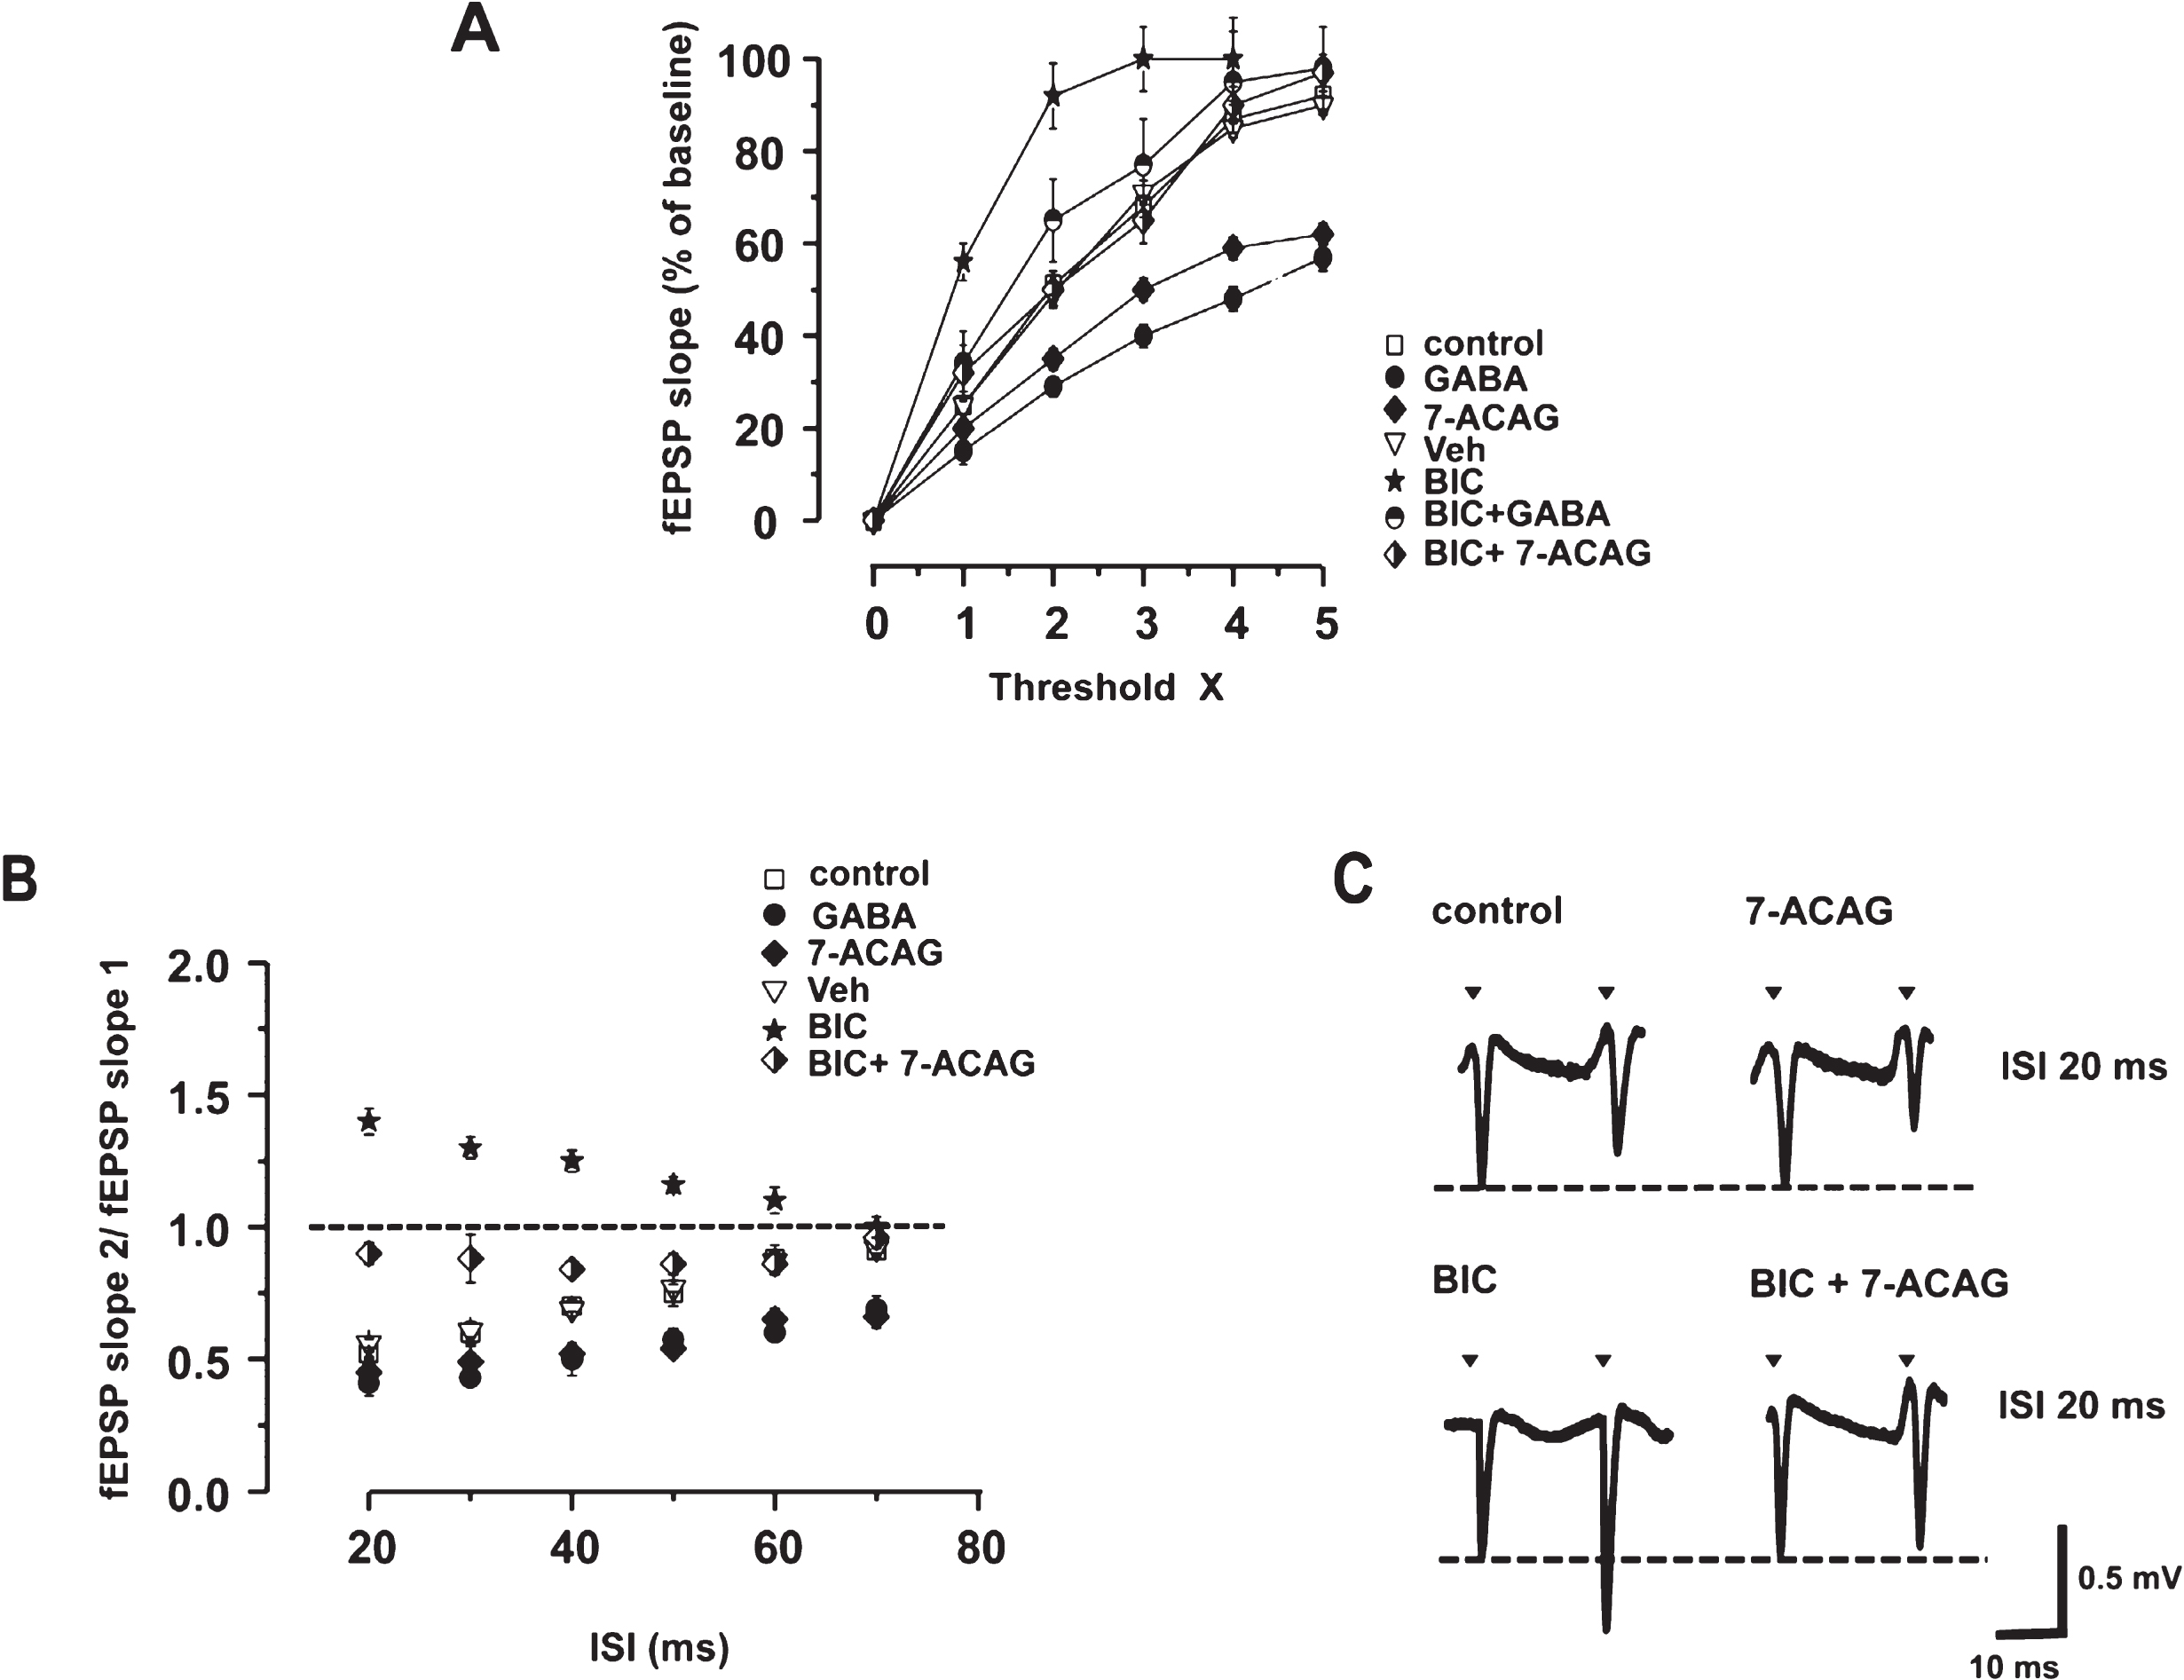 7-ACAG increases Paired-pulse (PP) inhibition and reduces the Bicuculline (BIC) hyperexcitability effect. A) The control Input/Output curve (I/O; white squares) illustrates that the increase of the synaptic responses (field Excitatory Post-synaptic Potentials, fEPSP) of the CAI area is proportional to the increase of the synaptic stimulation. Threshold is defined as the initial response from which negative amplitude is obtained and that increases by 100% , five times the initial threshold value. Exposure to 7-ACAG (black rhombus) displaces the I/O curve to the right; similar results are obtained from application of GABA (black circles). BIC displaces the I/O curve to the left (black star). Application of GABA (white/black circles) or 7-ACAG (white/black rhombus) reduces the increase of hyperexcitability induced by BIC. The vehicle has no effect (white triangles). B) The delivery of two pulses with identical intensity and with Inter-stimuli intervals (ISI) <60 ms (ISI) causes the decrease in the amplitude of the second fEPSP. The relation between control slopes (fEPSP2/fEPSP1) (mean ± Standard error of the mean [SEM]) is depicted in white squares. 7-ACAG increases Paired-pulse inhibition (PPi) (black rhombus). The GABA effect (3 mM) is illustrated in black circles. The vehicle does not modify the PPi. Bicuculline (BIC) facilitates Paired-pulse (PP) in CA1 area (black stars); however, 7-ACAG significantly blocks the powerful hyperexcitability effect of BIC (white/black rhombus; p≤0.001). C) Representative synaptic responses at ISI 20 ms with increased slope induced by BIC and overlying fEPSP that depict the effects of the application of 7-ACAG (upper panel) and BIC+7-ACAG (lower panel). Calibration: 0.5 mV; 10 ms.